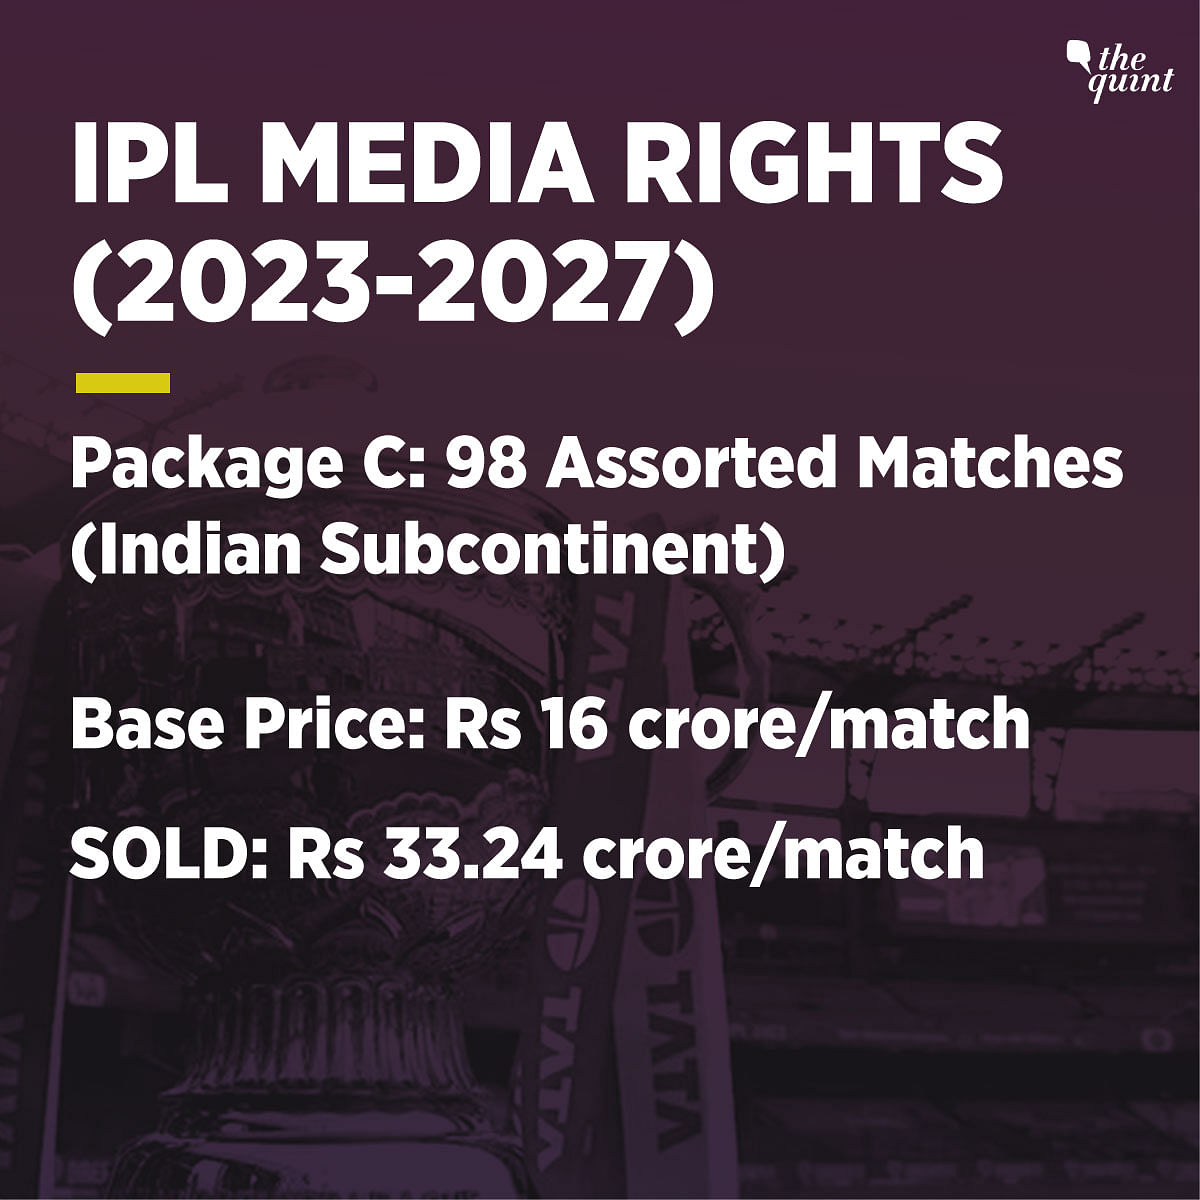 The digital rights of the IPL have been sold for over Rs 23,757 crore.